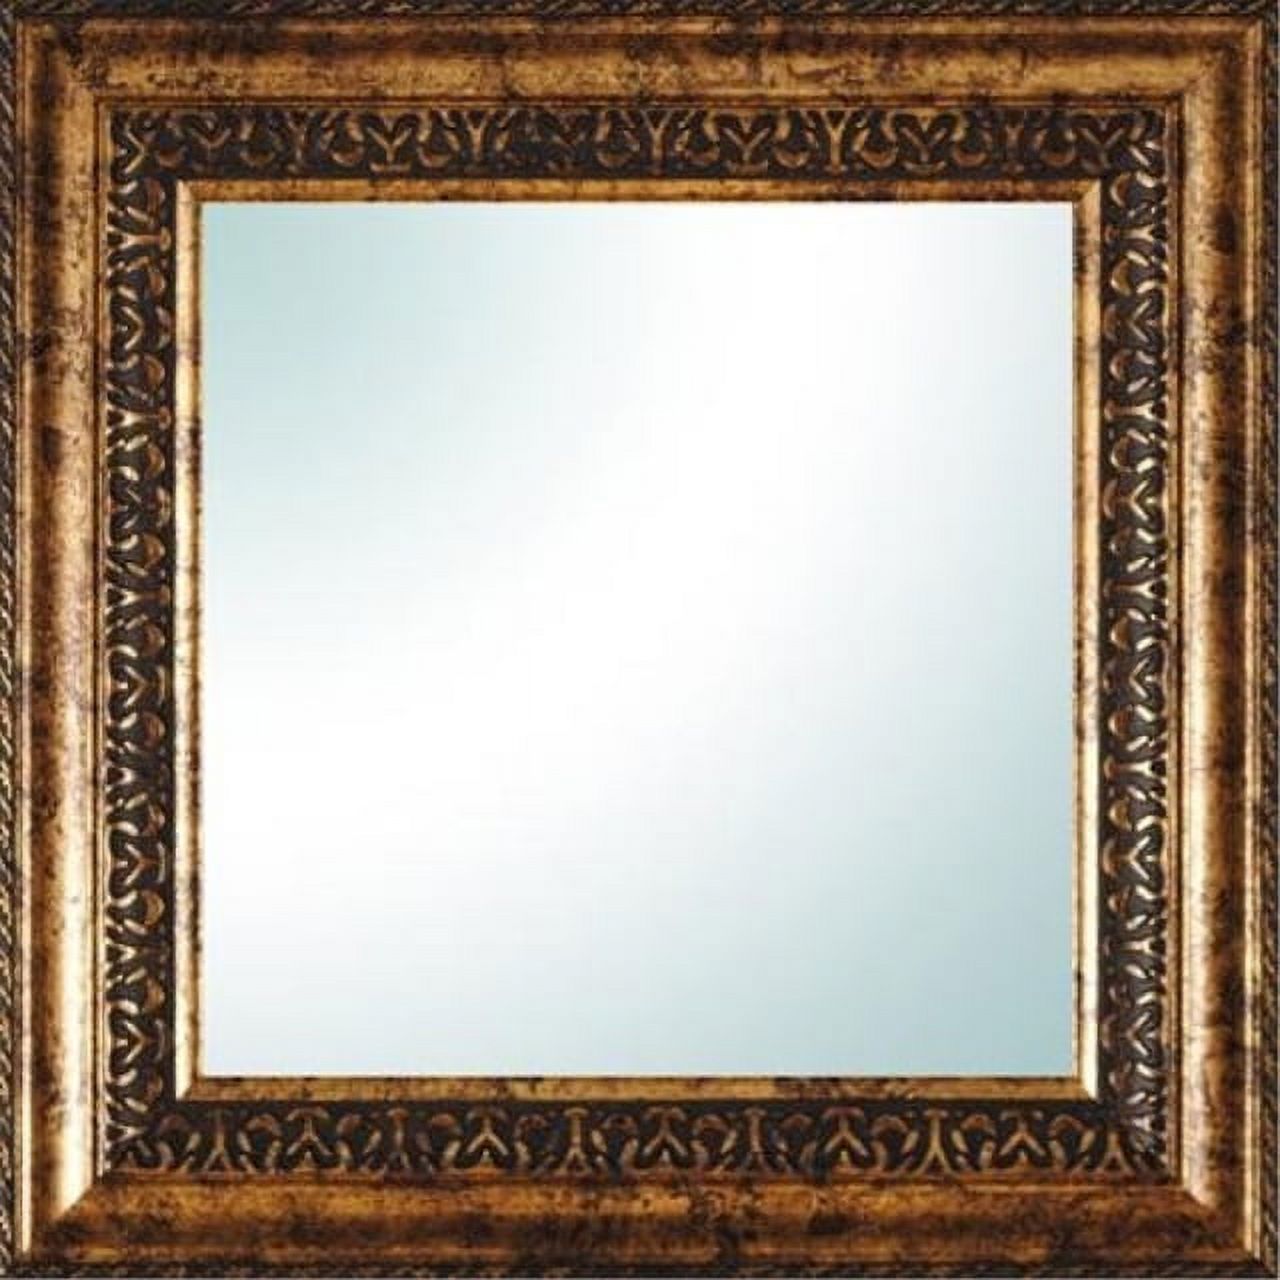 PTM Images 14" x 14" Gold Ornate Square Mirror - image 1 of 1